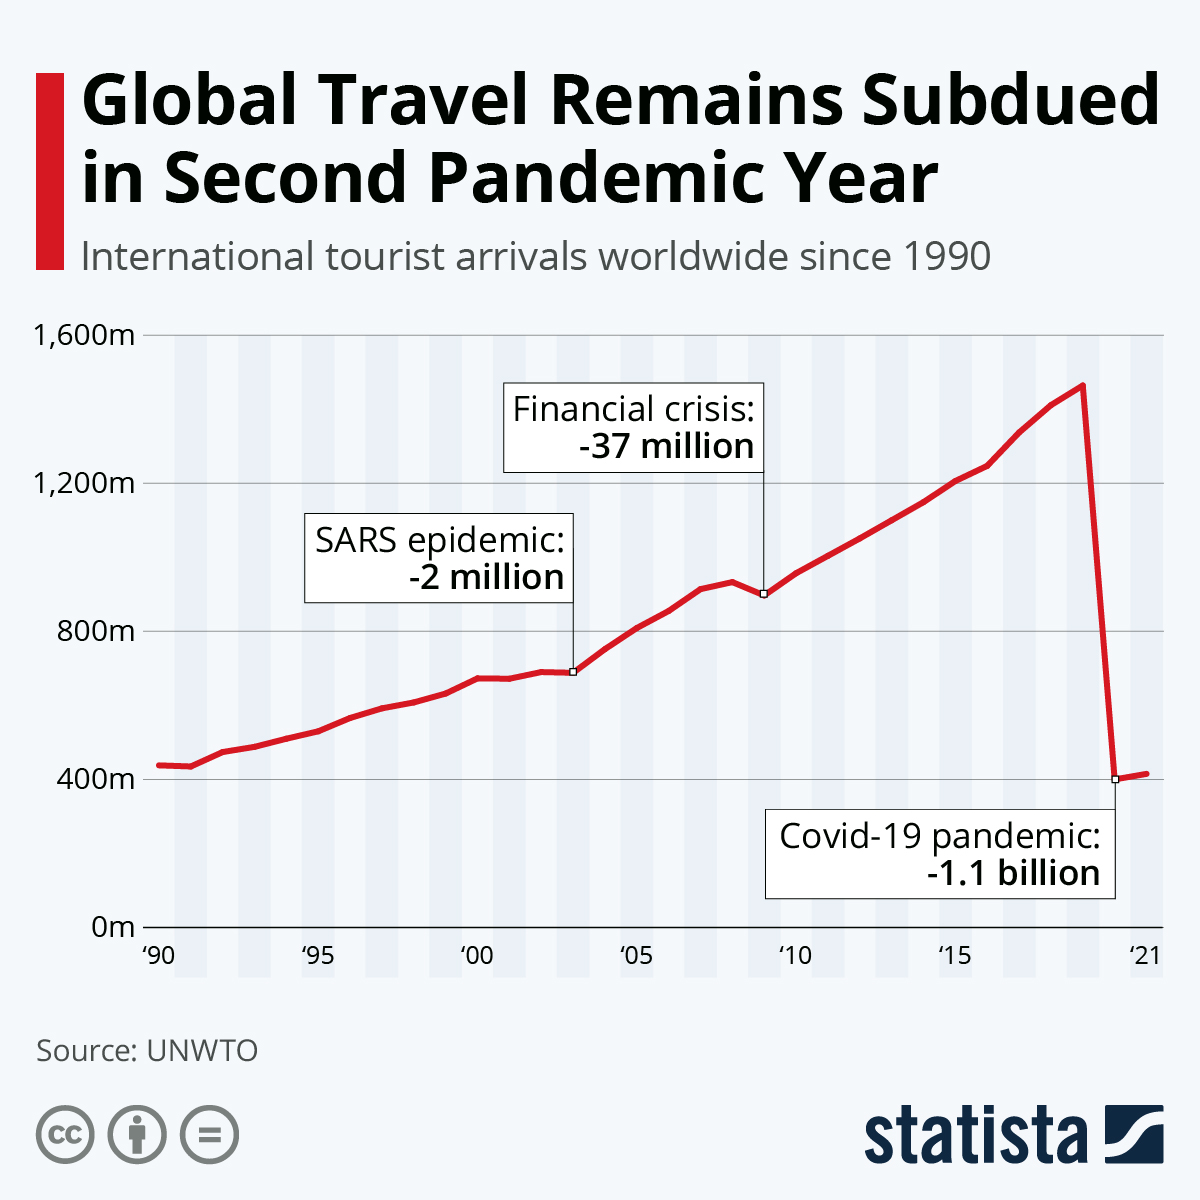 Global Travel Remains Subdued in Second Pandemic Year